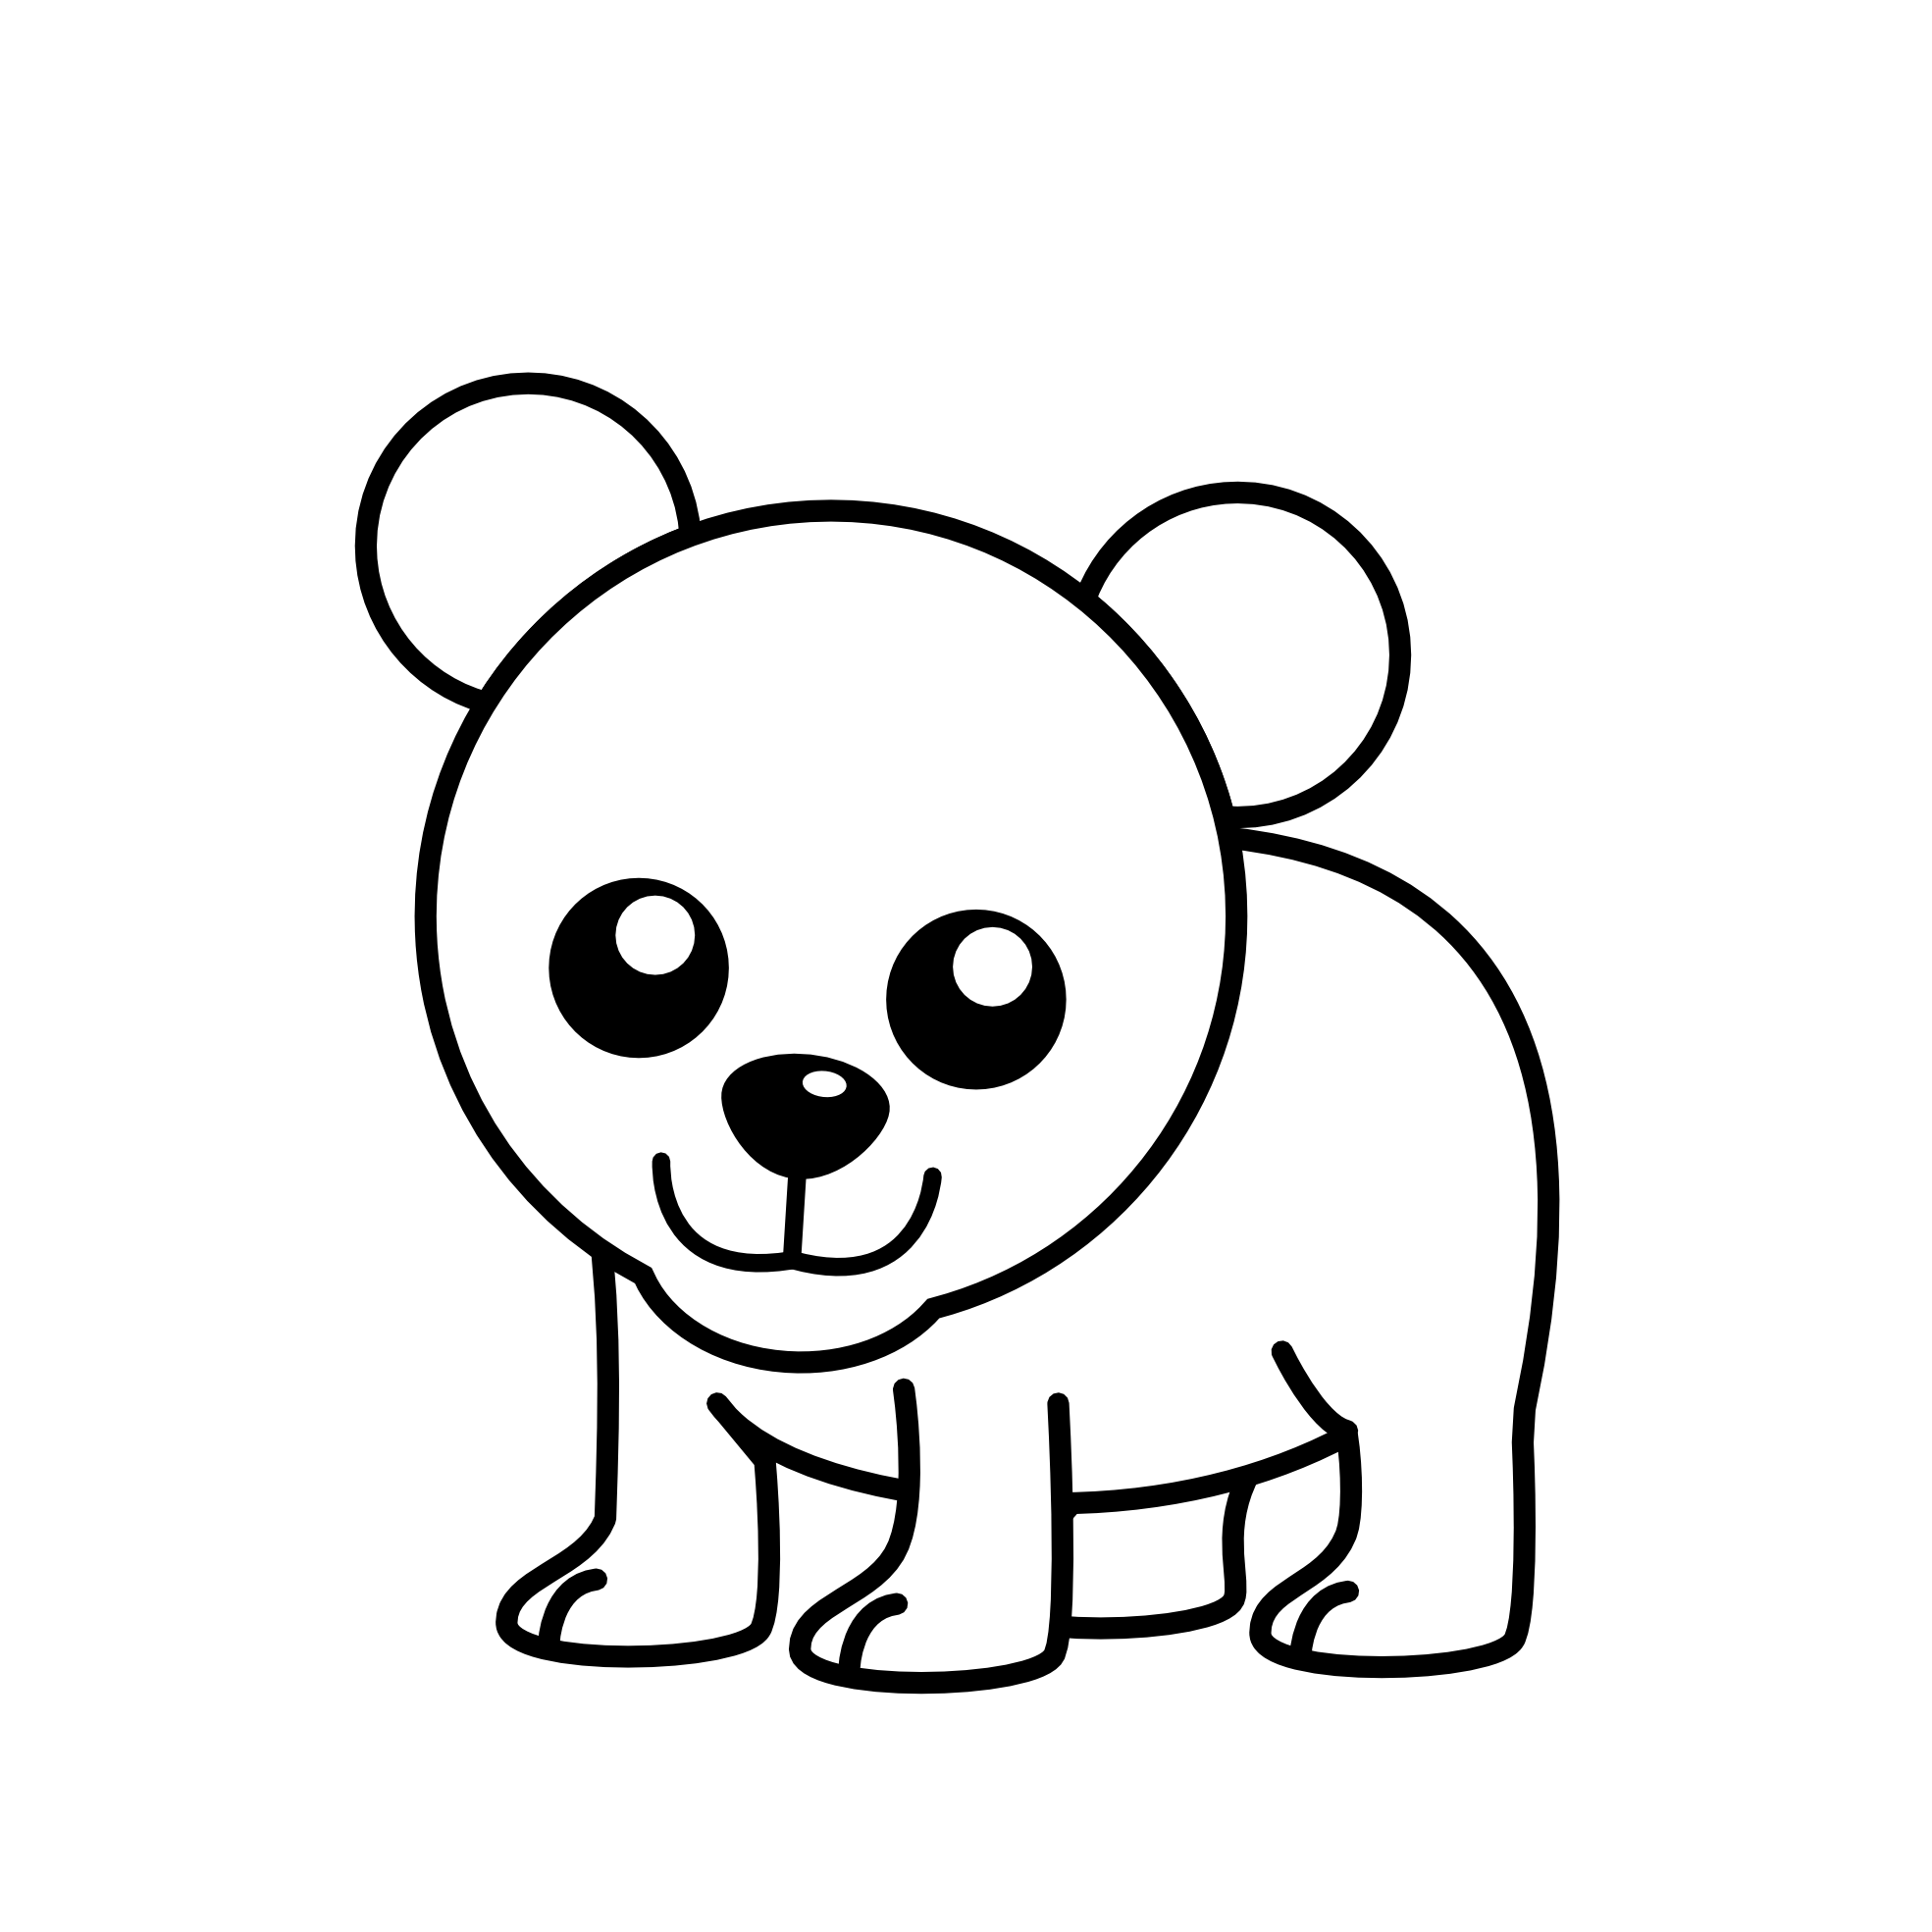 Free Bear Cub Clipart Black And White, Download Free Bear Cub Clipart